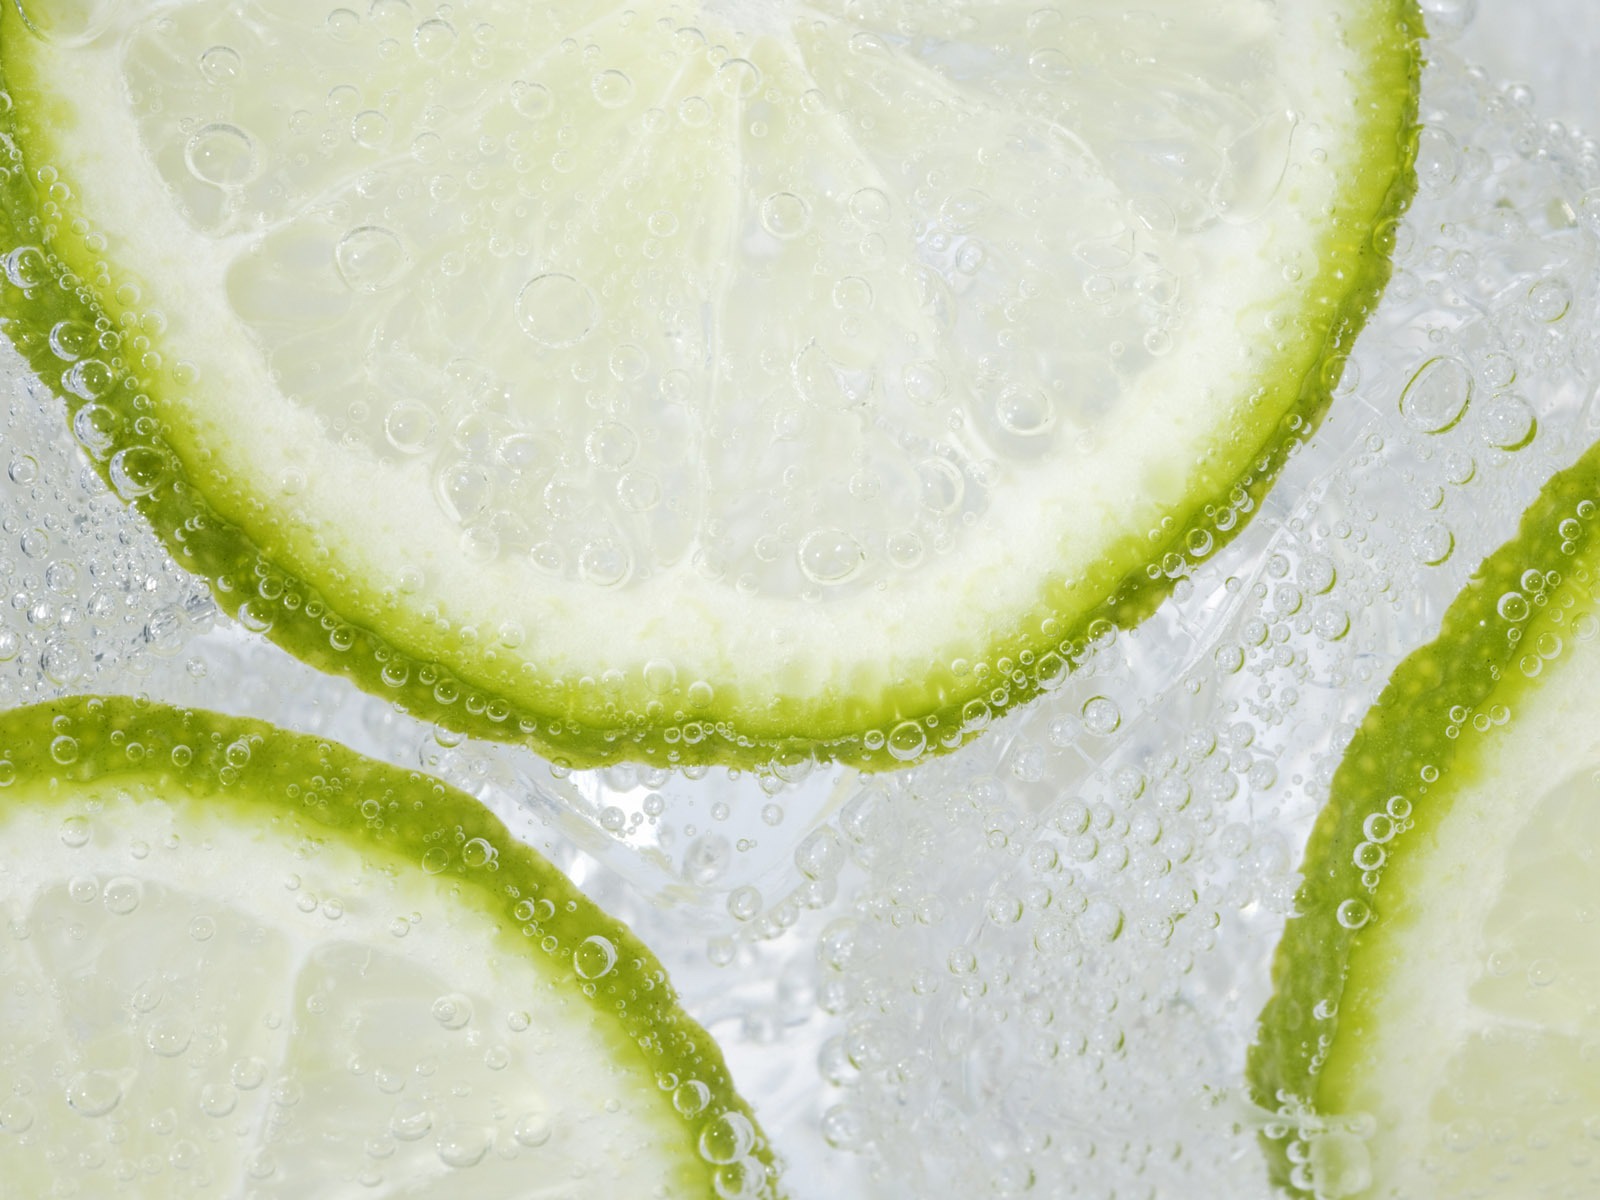 Ice-cold drinks Wallpaper #37 - 1600x1200